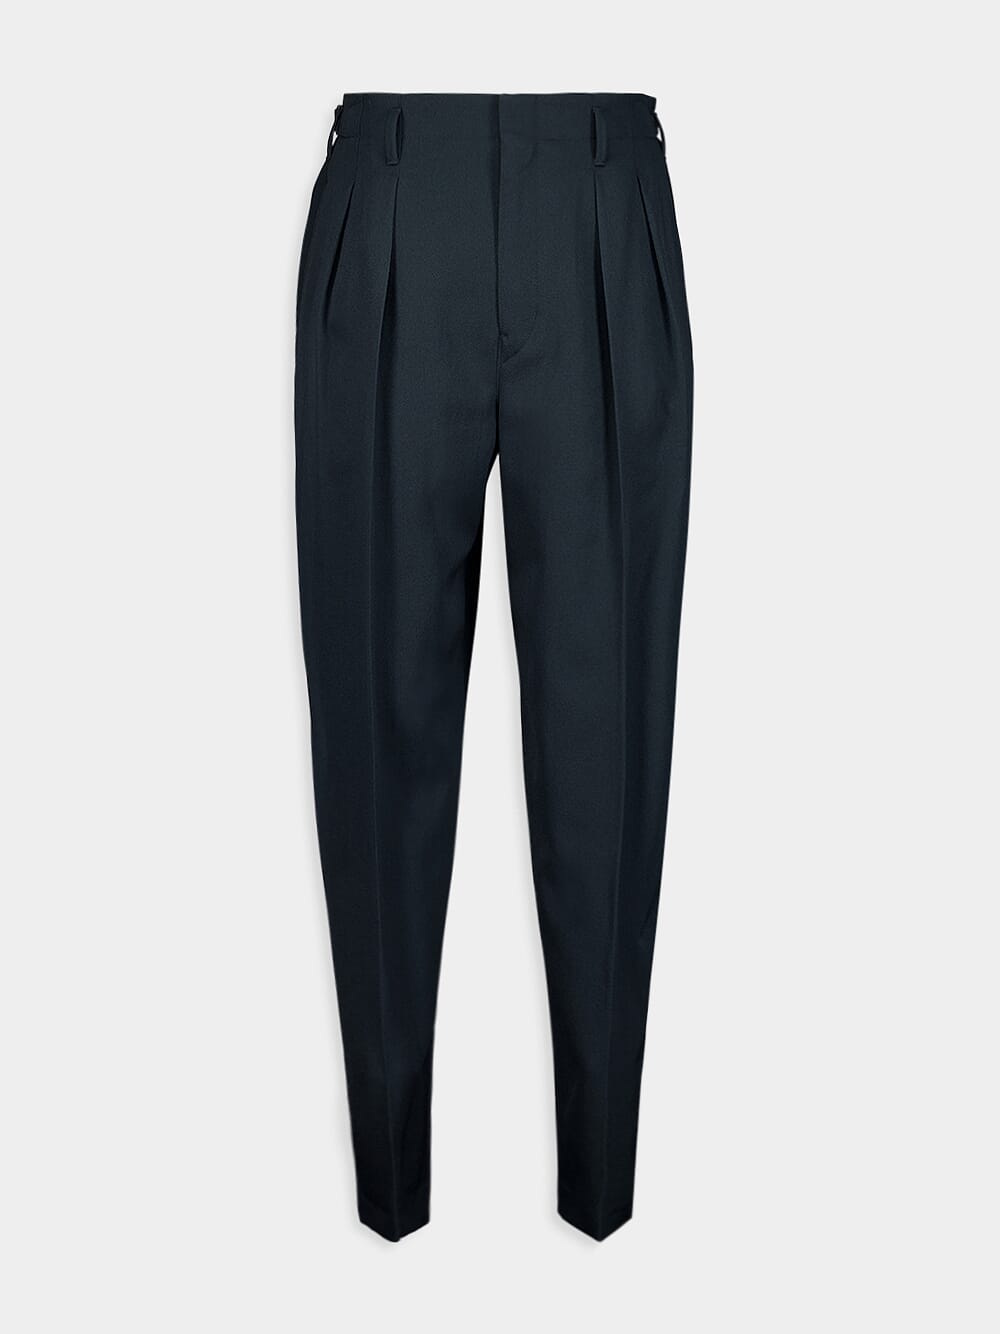 LemairePleated Tapered Wool Pants at Fashion Clinic